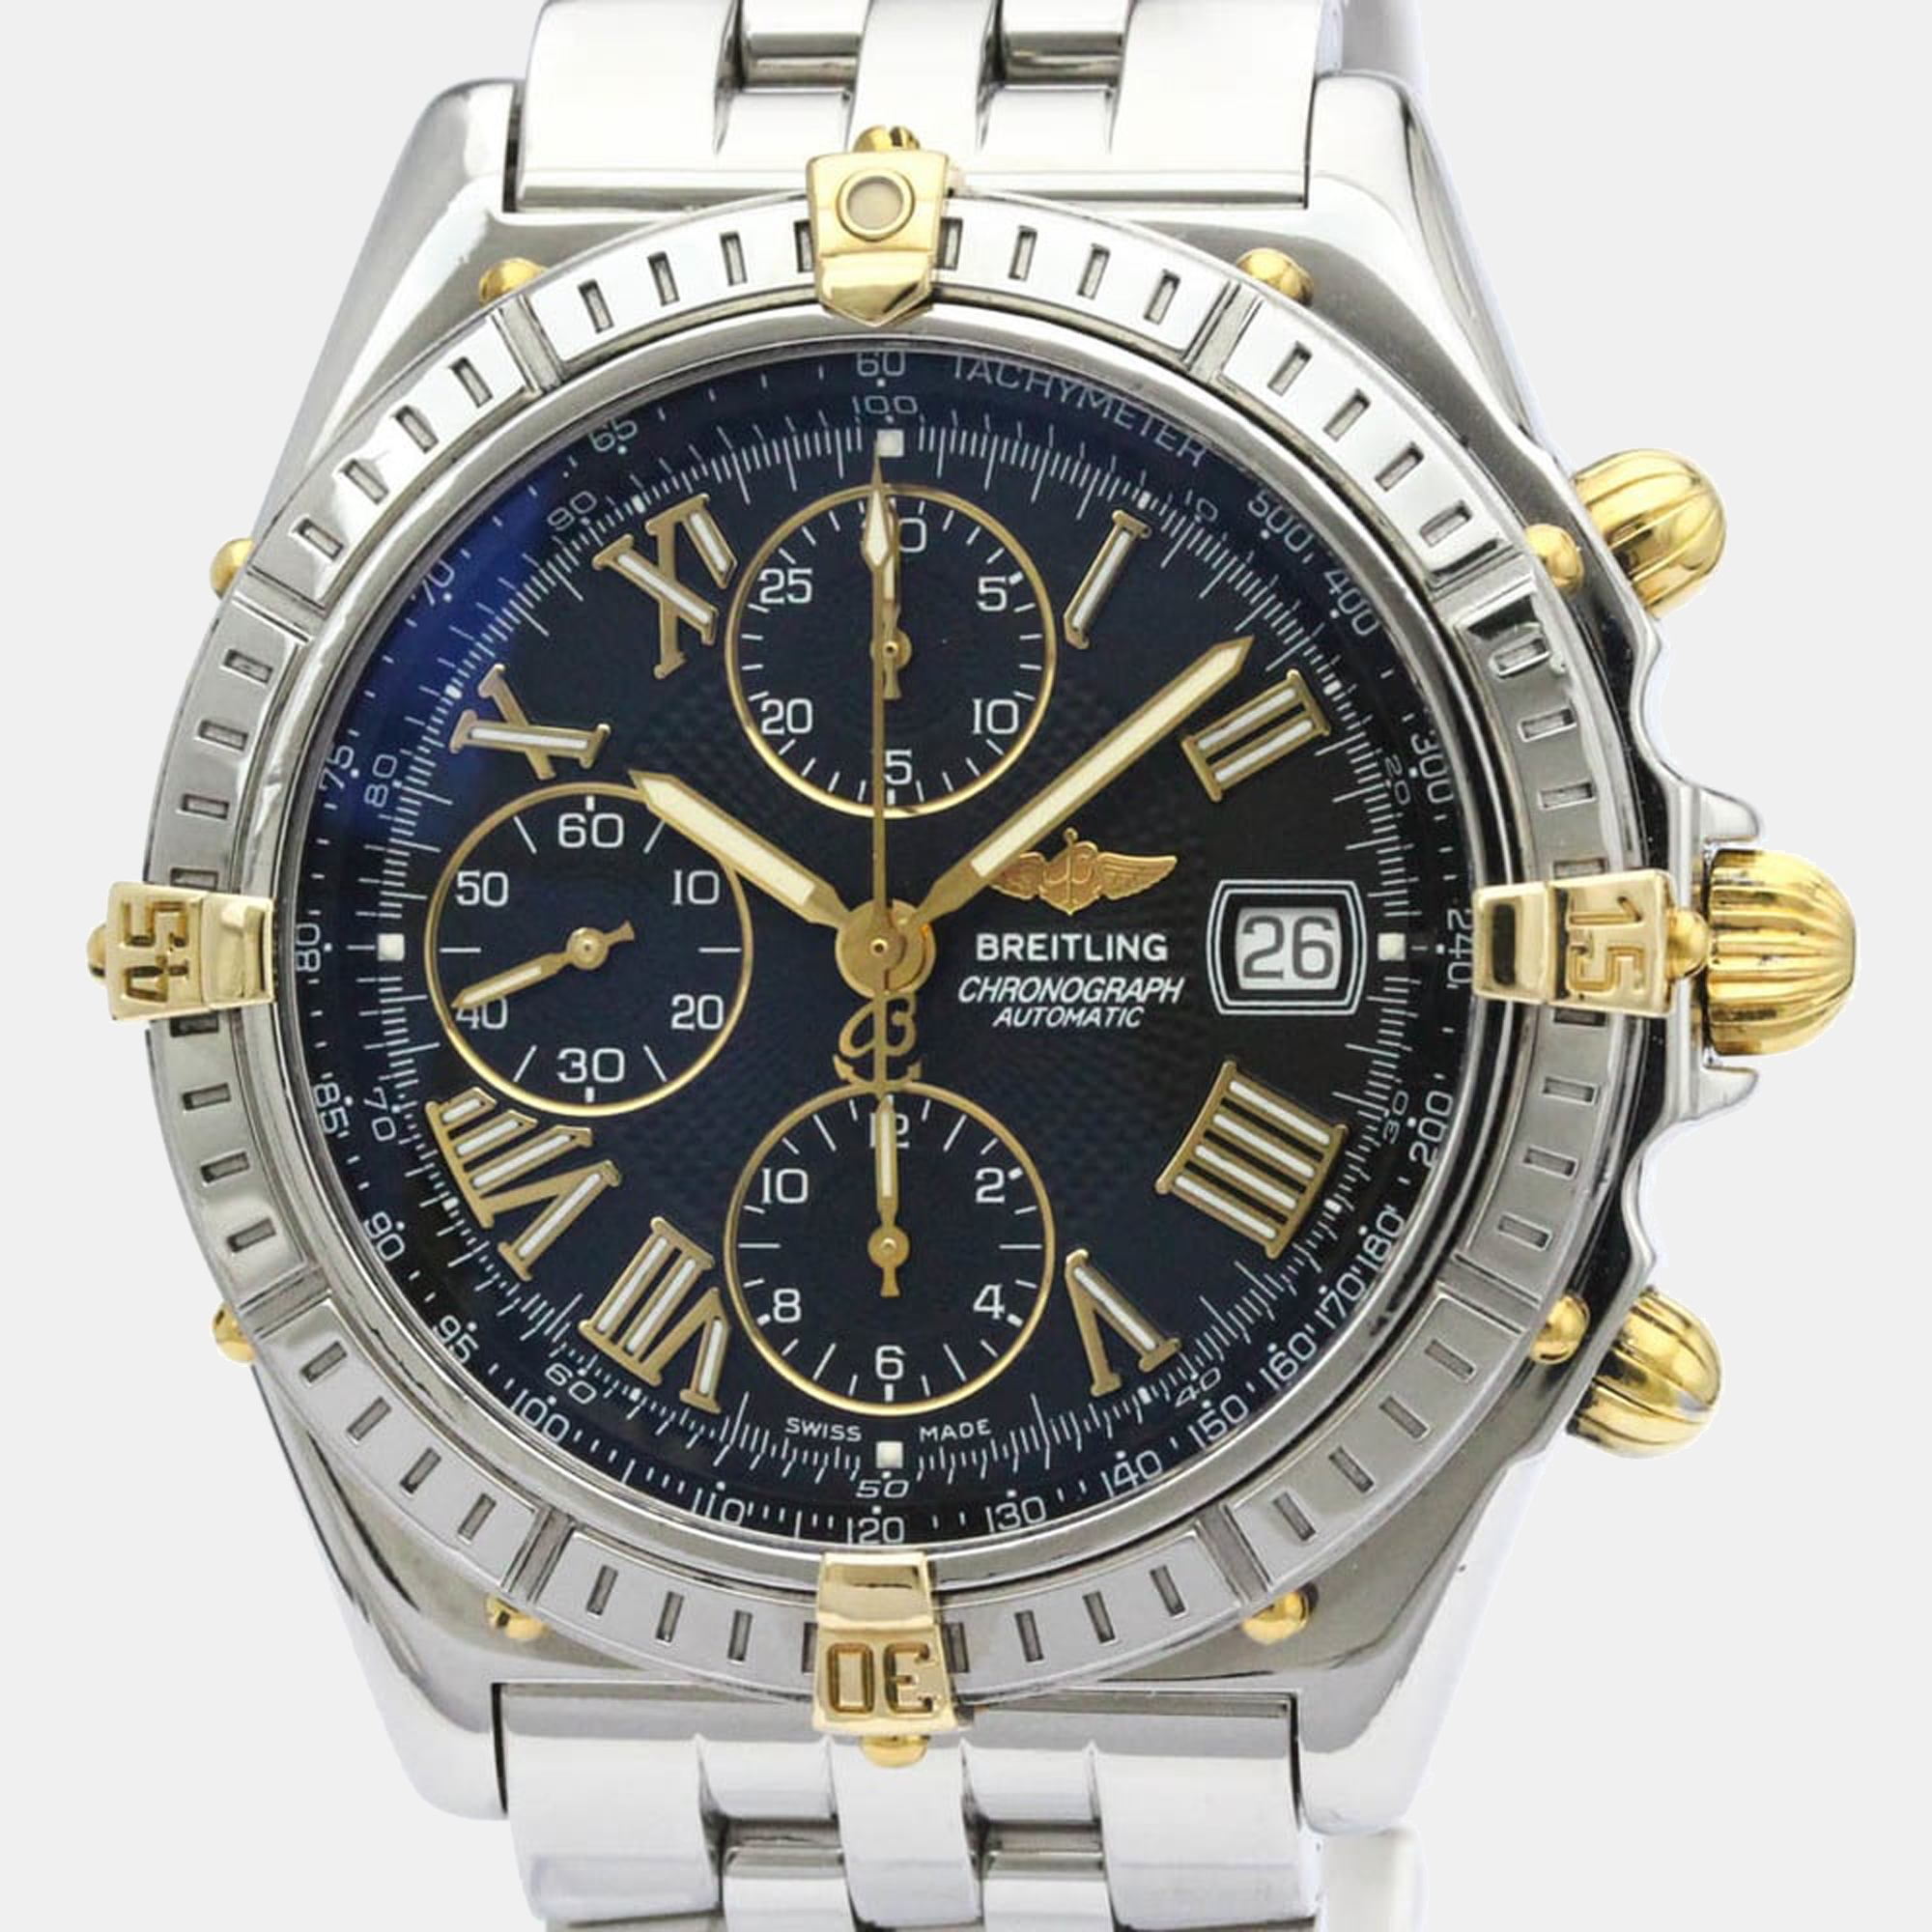 Breitling Black 18K Yellow Gold And Stainless Steel Crosswind Men's Wristwatch 44 Mm